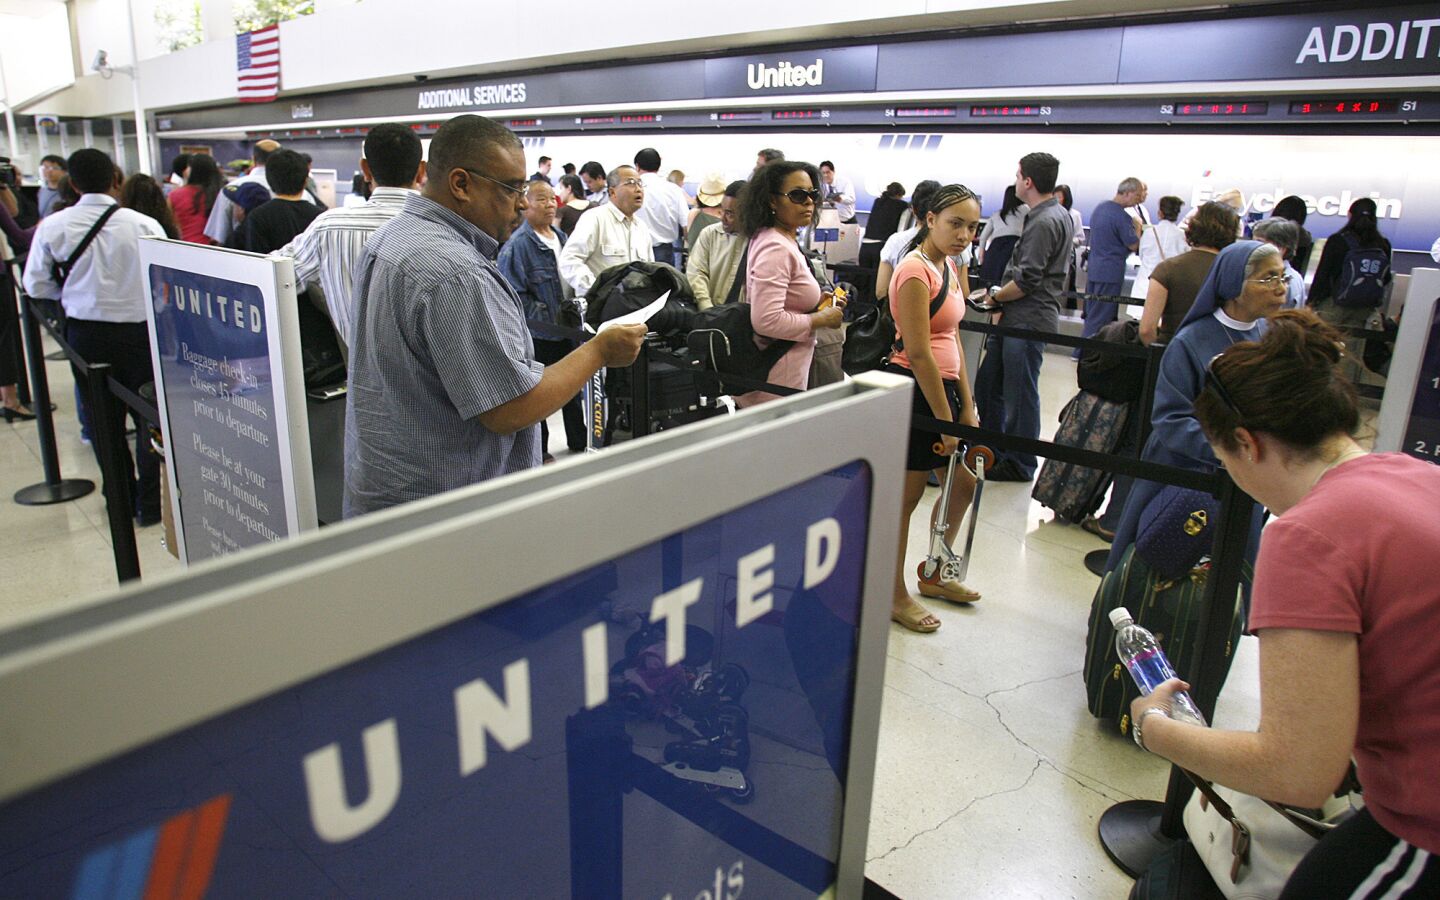 Rating: 60 out of 100.United received the lowest rating among the largest airlines. The carrier's score was down from 62 in 2013.